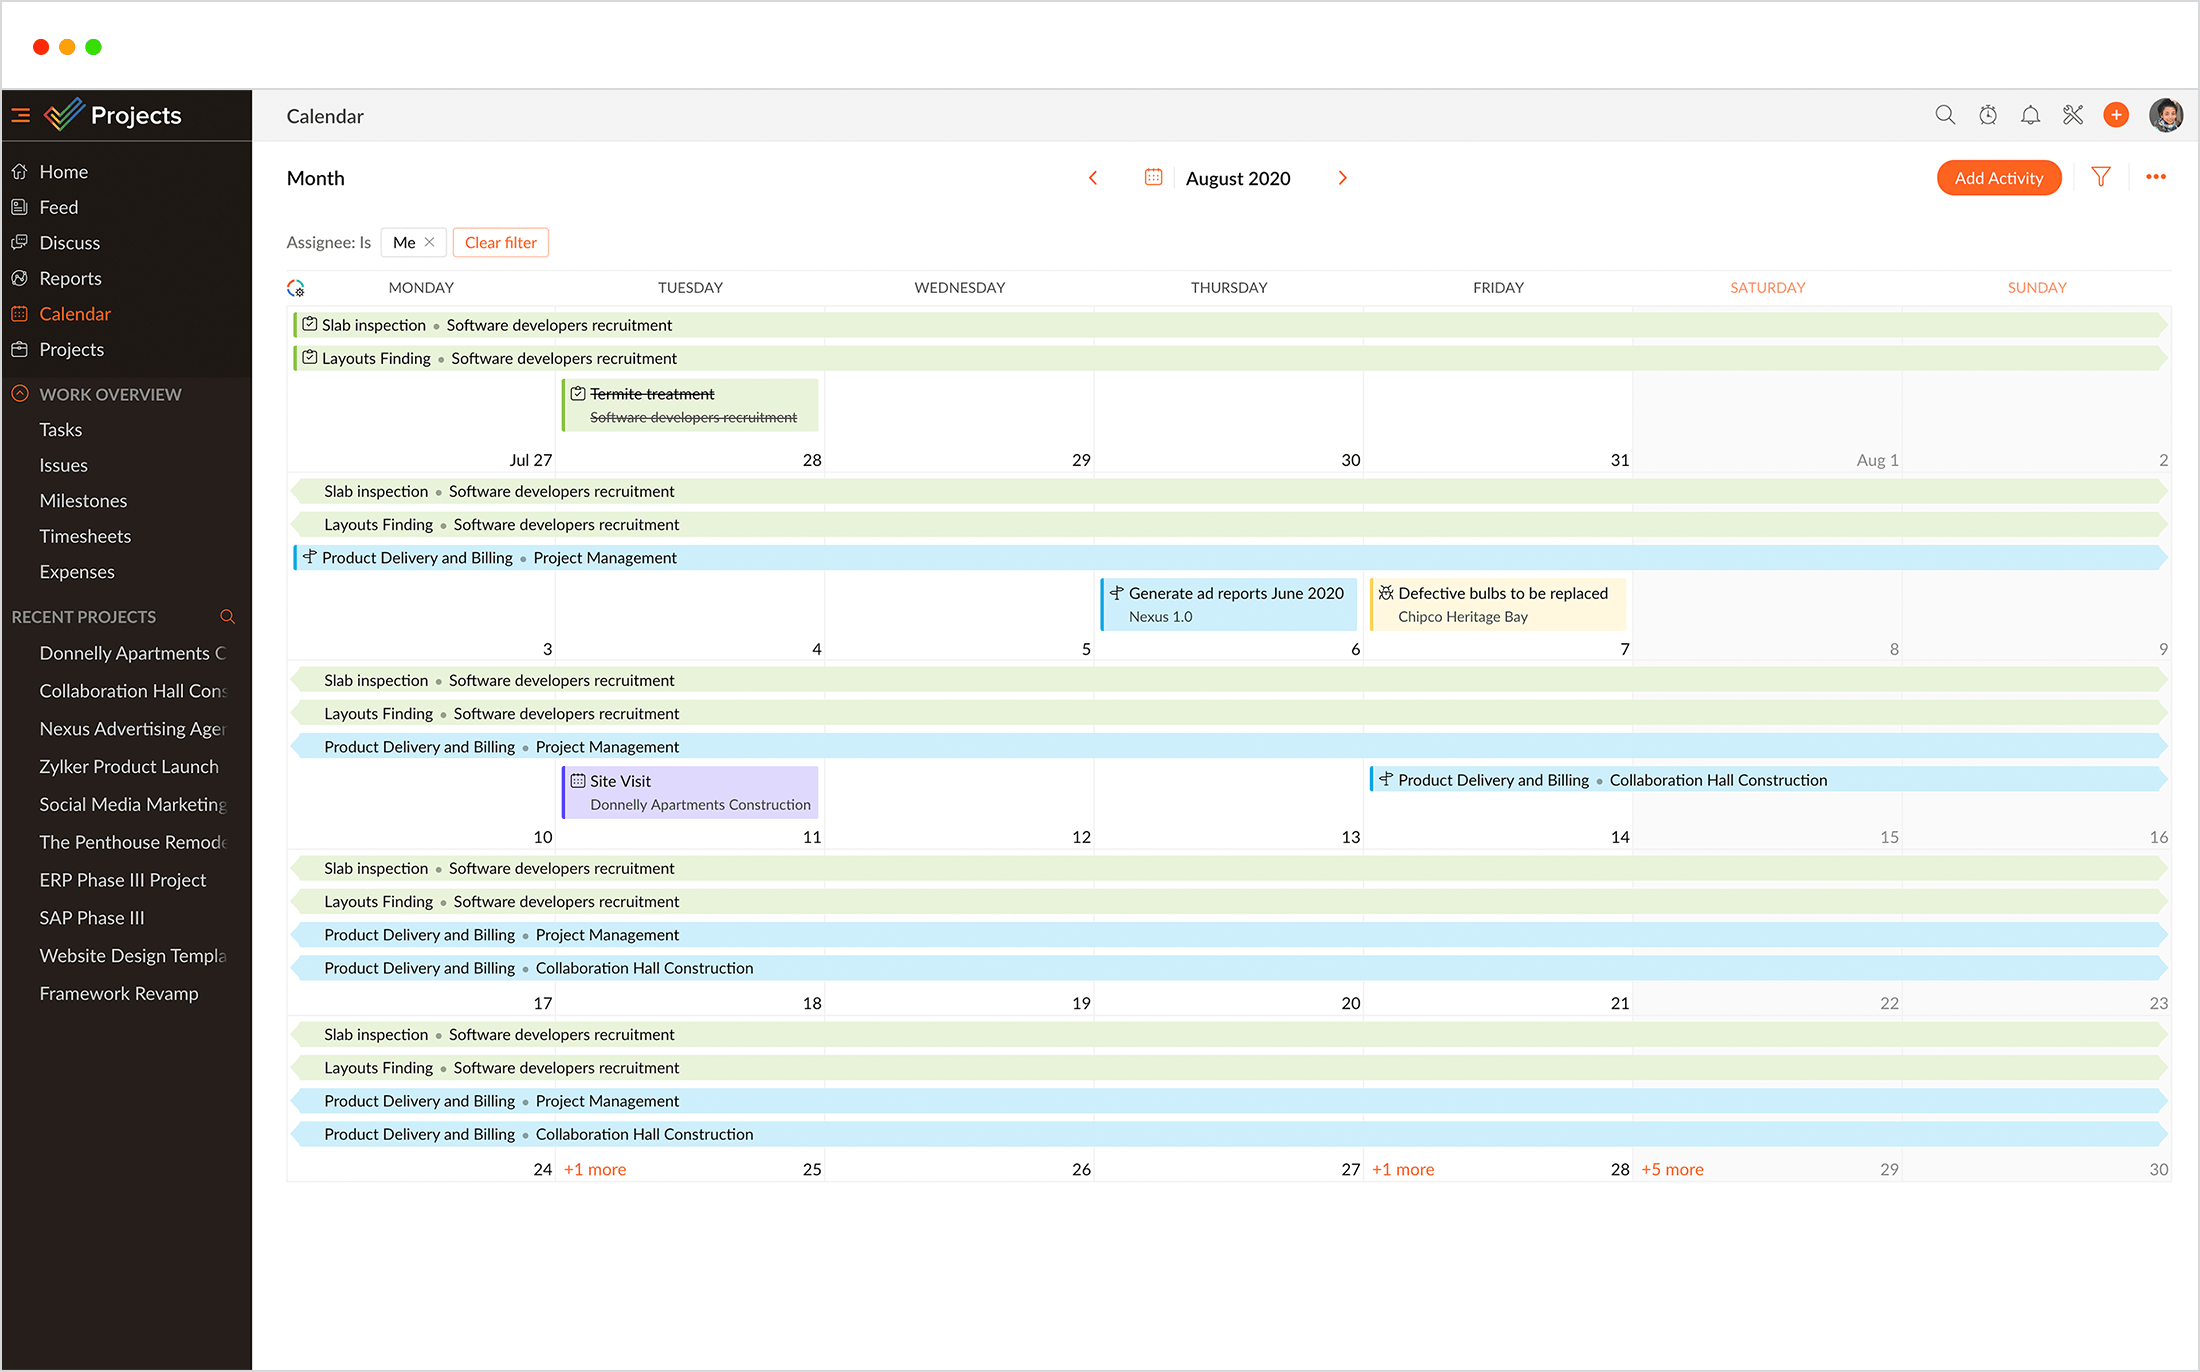 Calendar to add marketing events & meetings